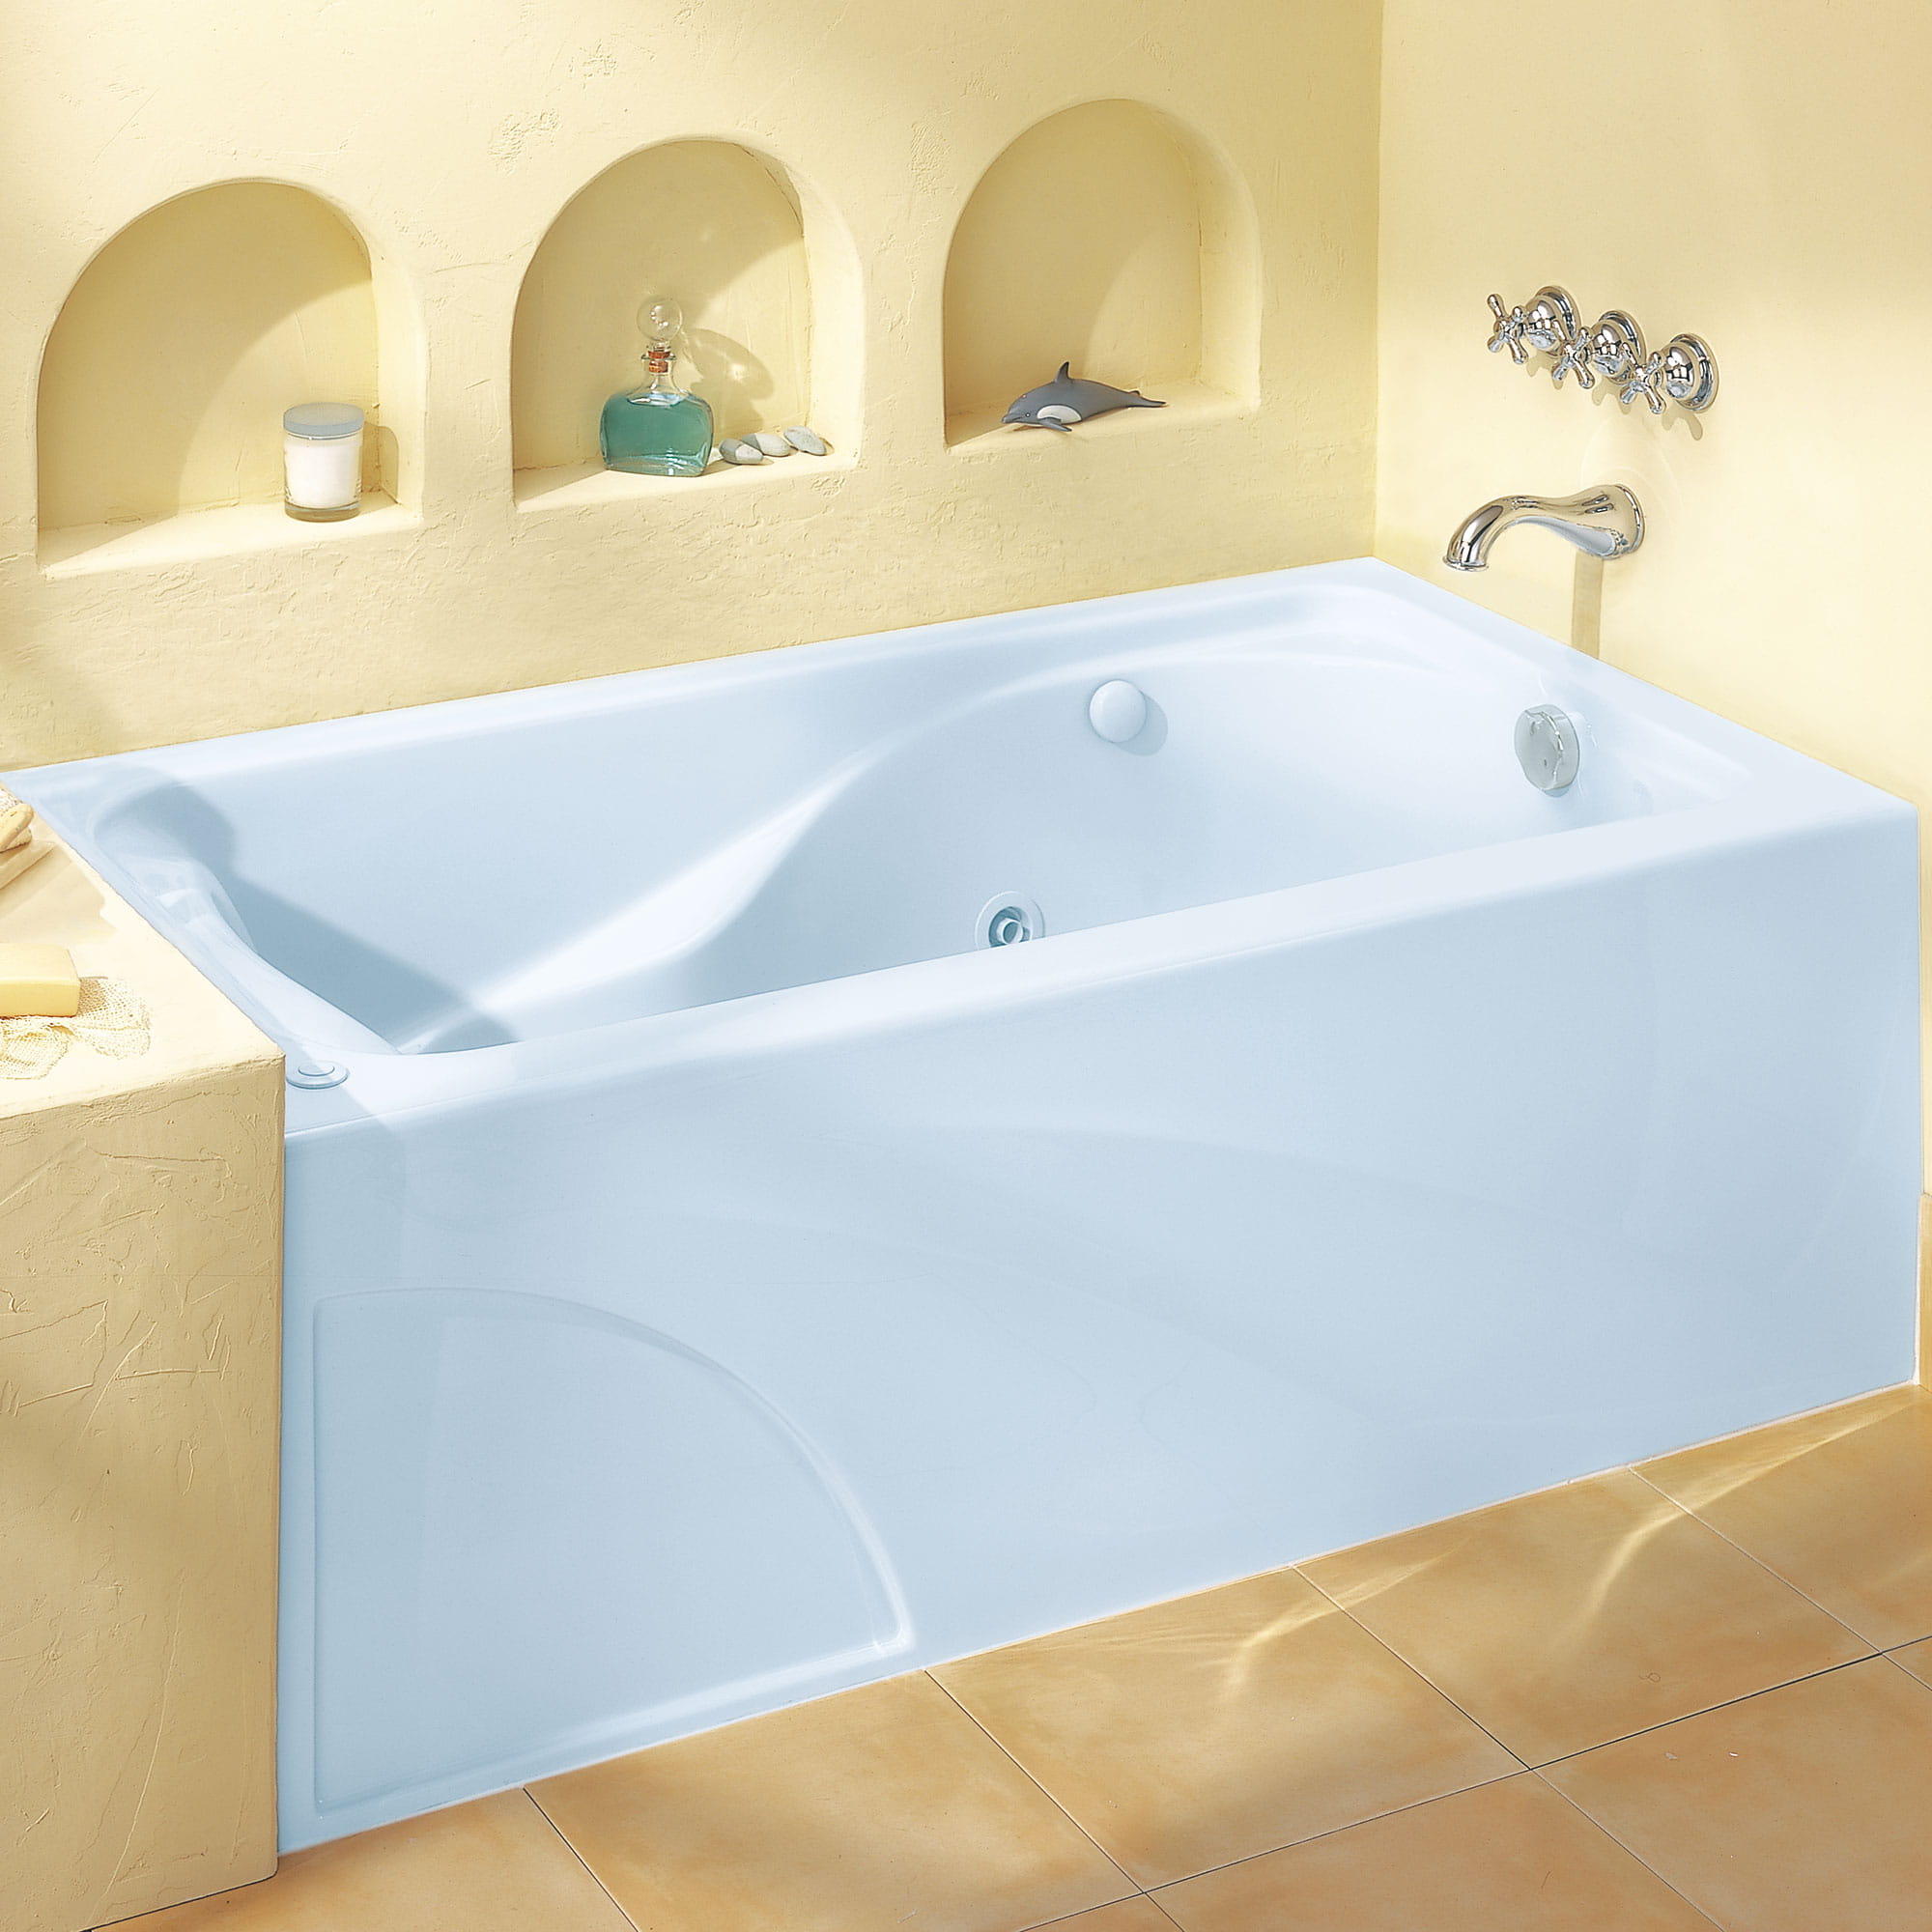 Cadet 60 x 32 Inch Integral Apron Bathtub Right Hand Outlet With Hydromassage System WHITE